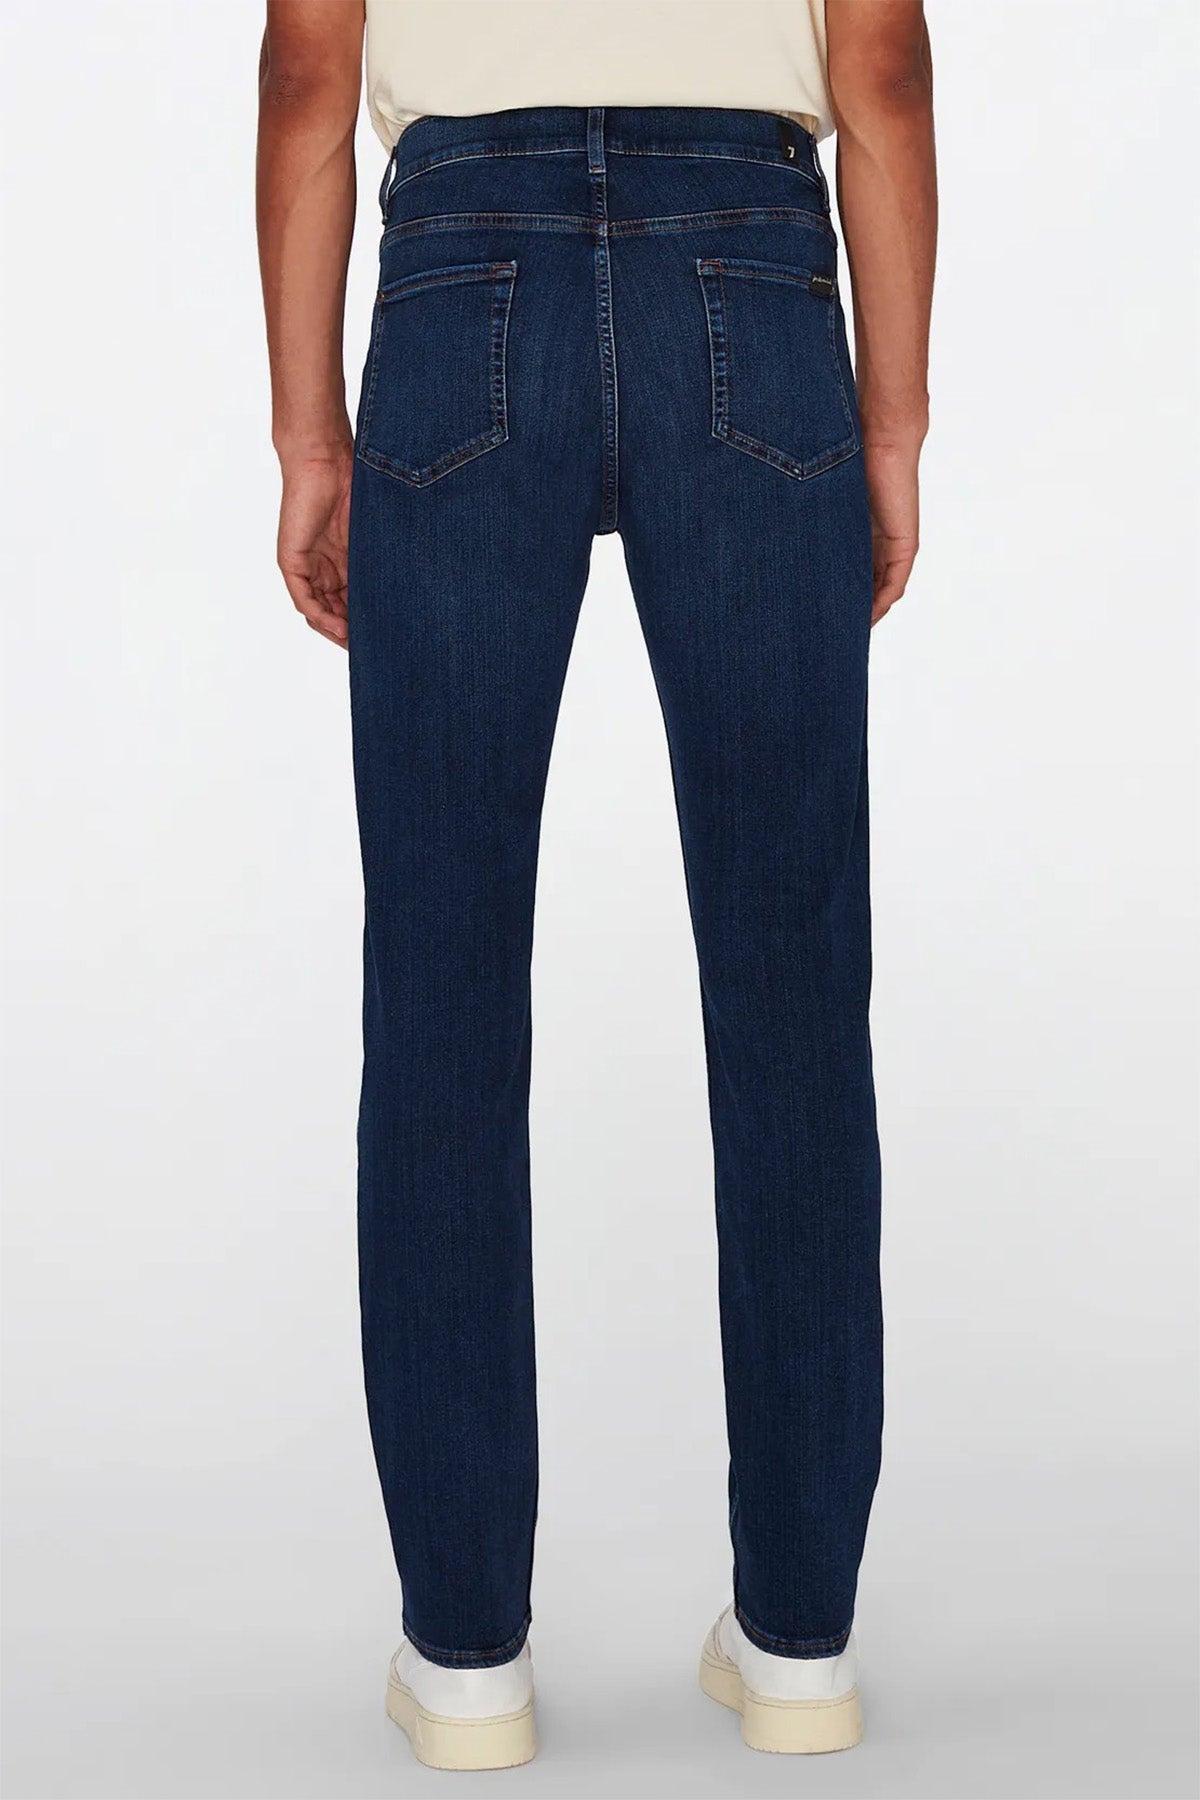 7 For All Mankind Slimmy Tapered Moden Slim Fit Jeans